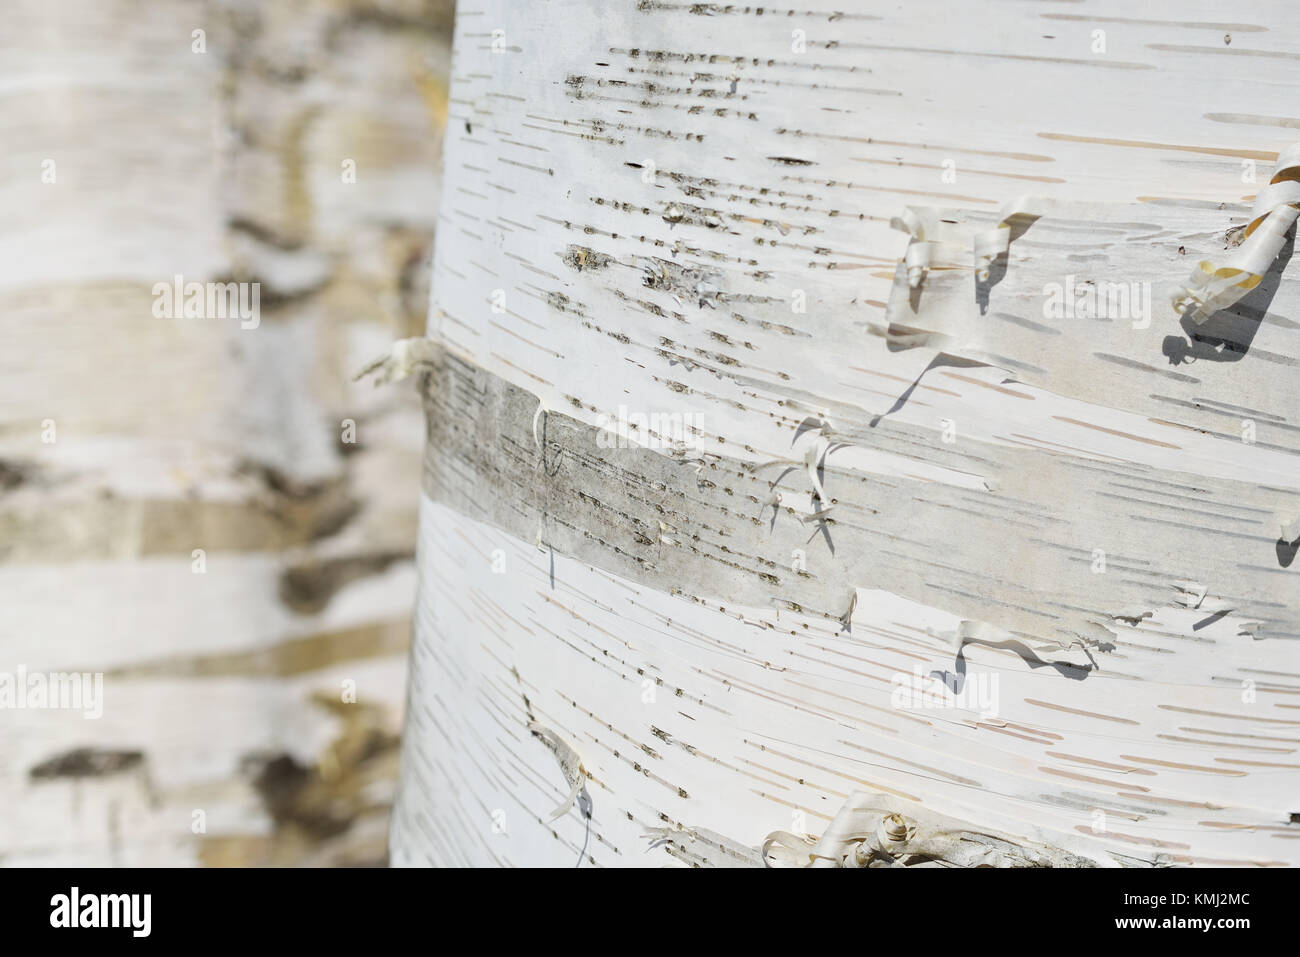 Birch bark background. Tree trunk detail showing the smooth texture, curly peelings, striped markings and silver, white and grey color pattern on pla Stock Photo